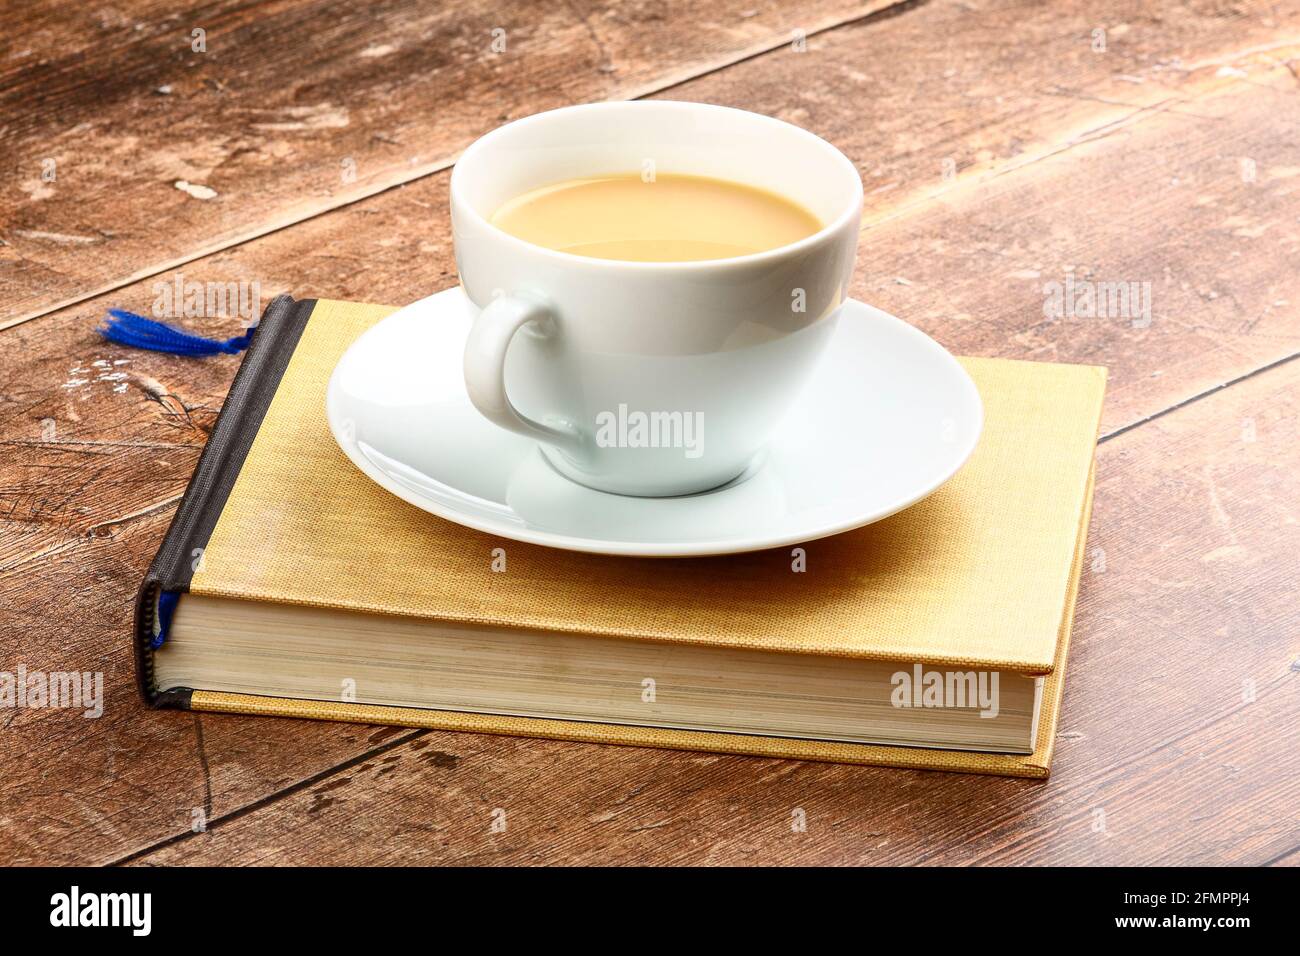 White cup and saucer filled with tea sat on a reading book on a rustic wooden table top Stock Photo